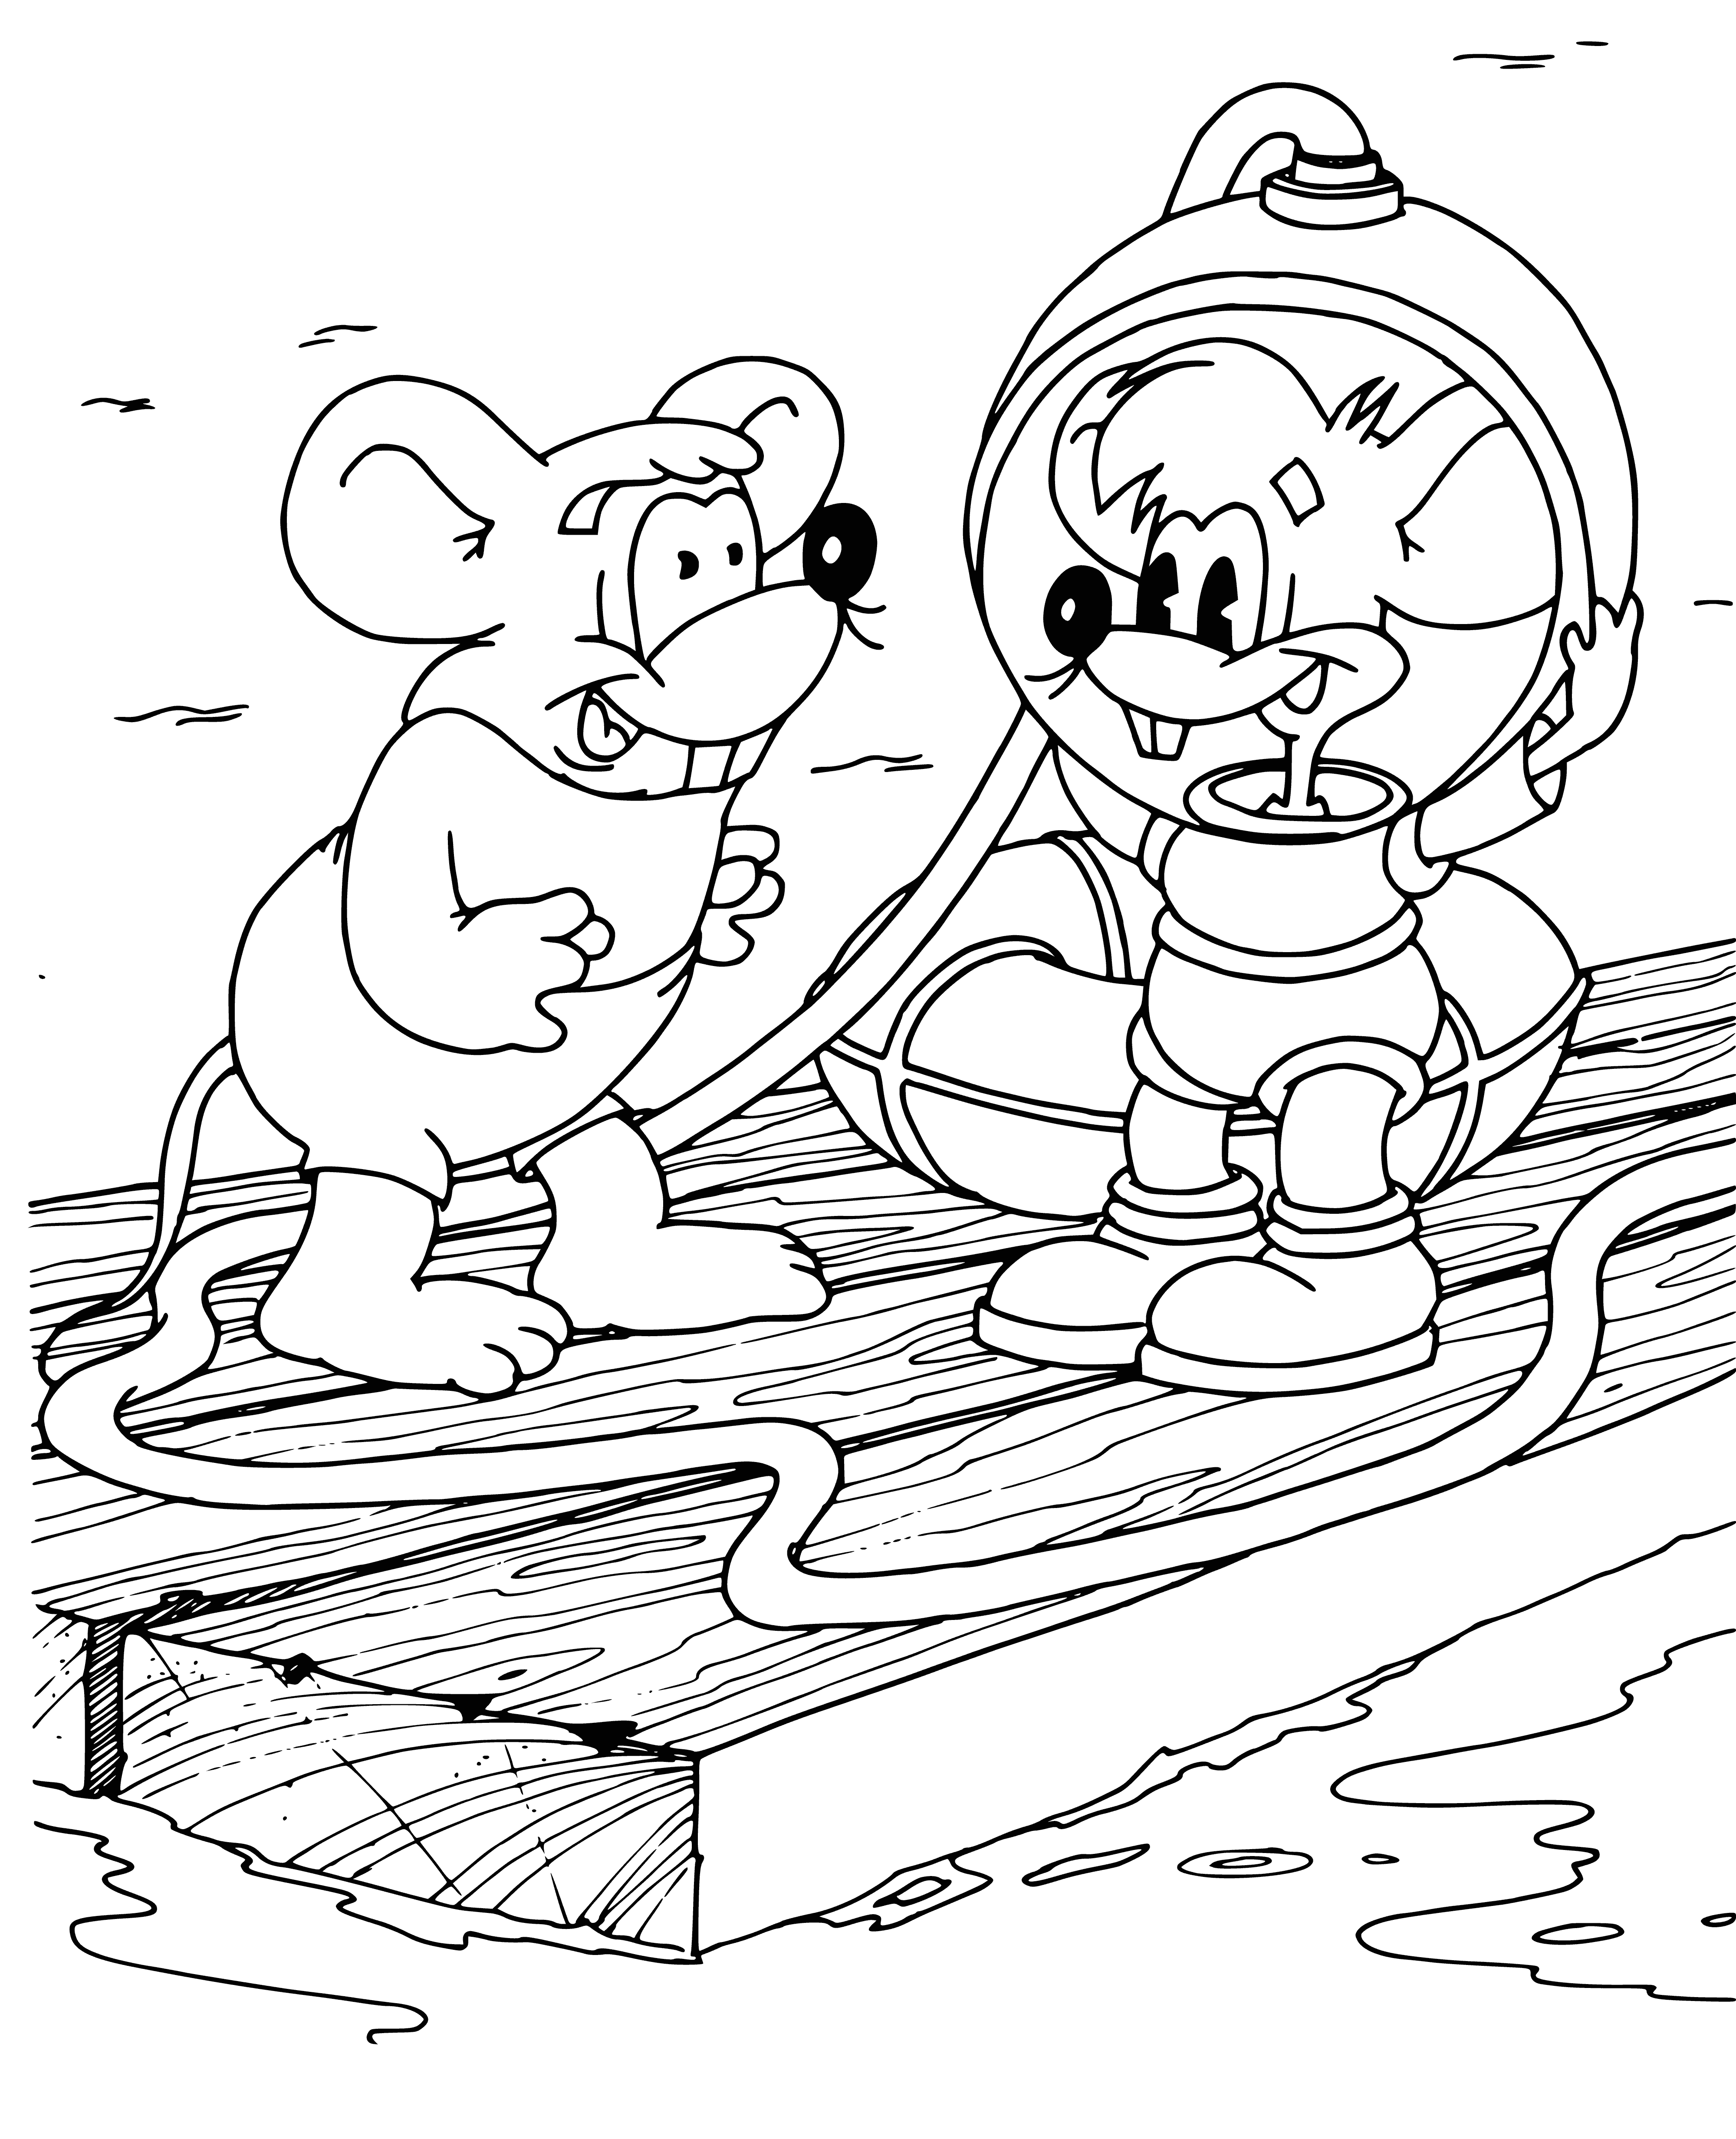 coloring page: Leopold, wearing red & white, dives into a bright blue pool with a beach ball under his arm and a smile on his face. #poolparty